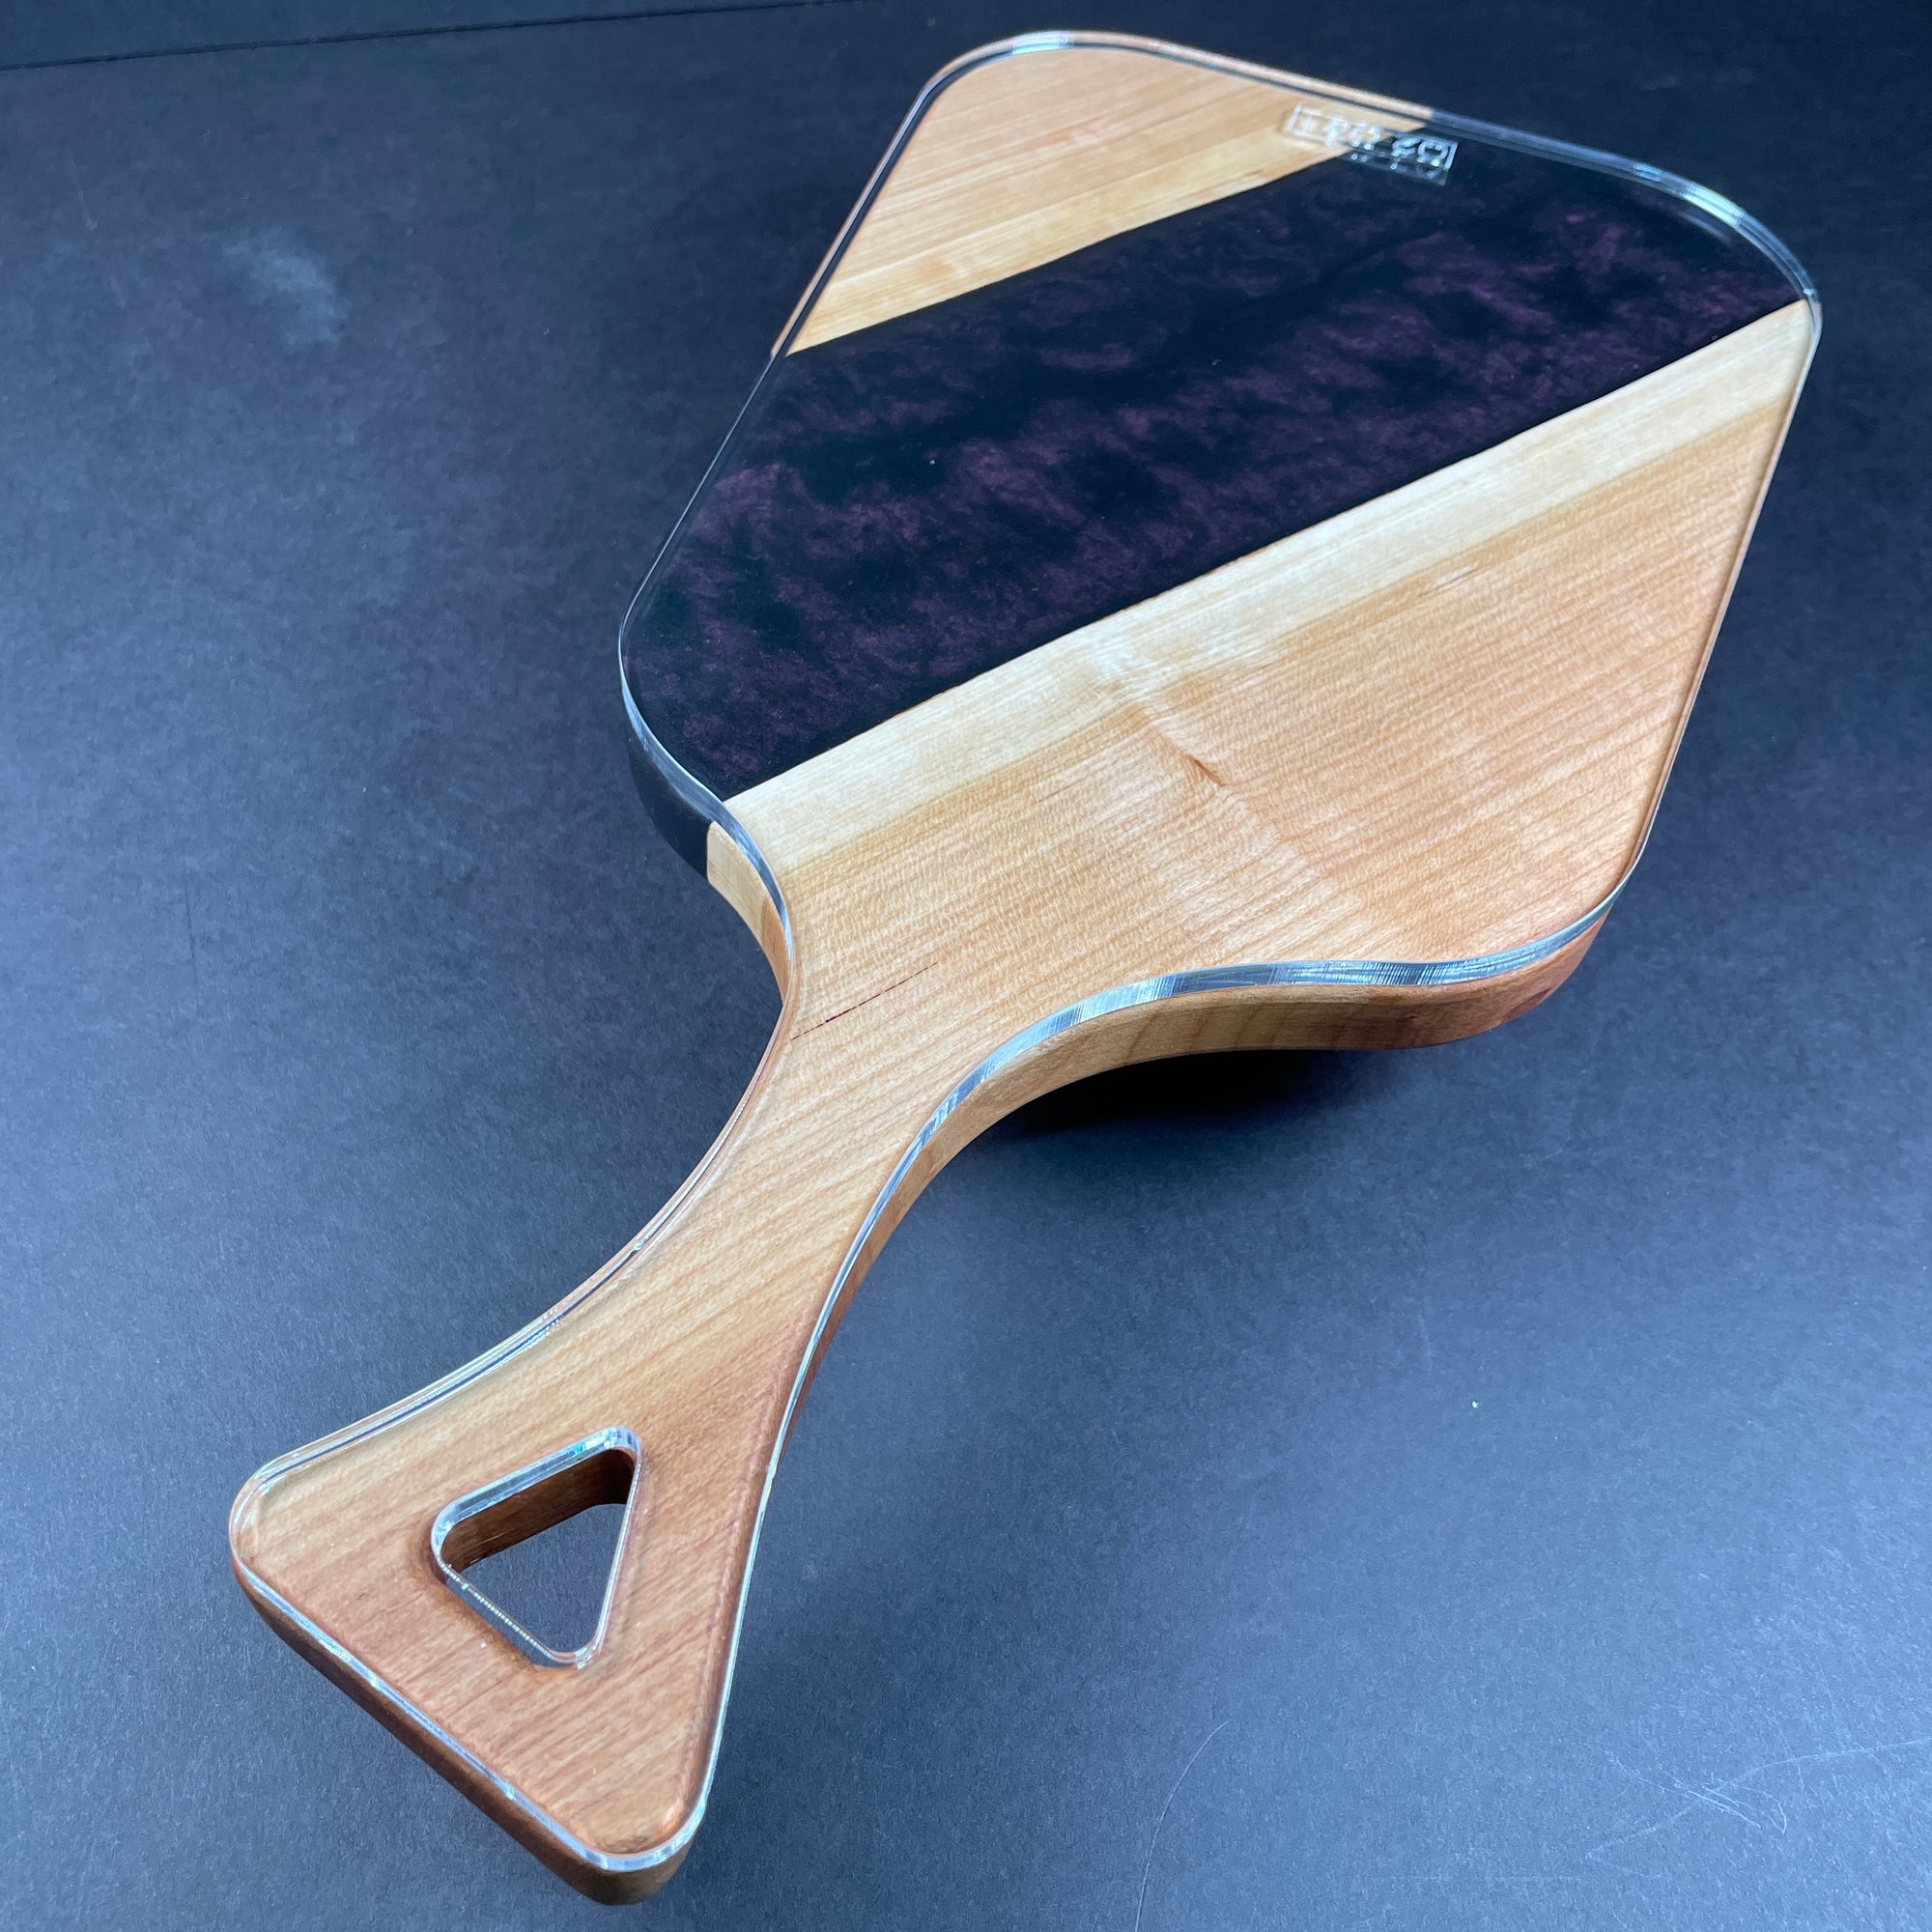 Serving Board "Triangle Handle" Router Template